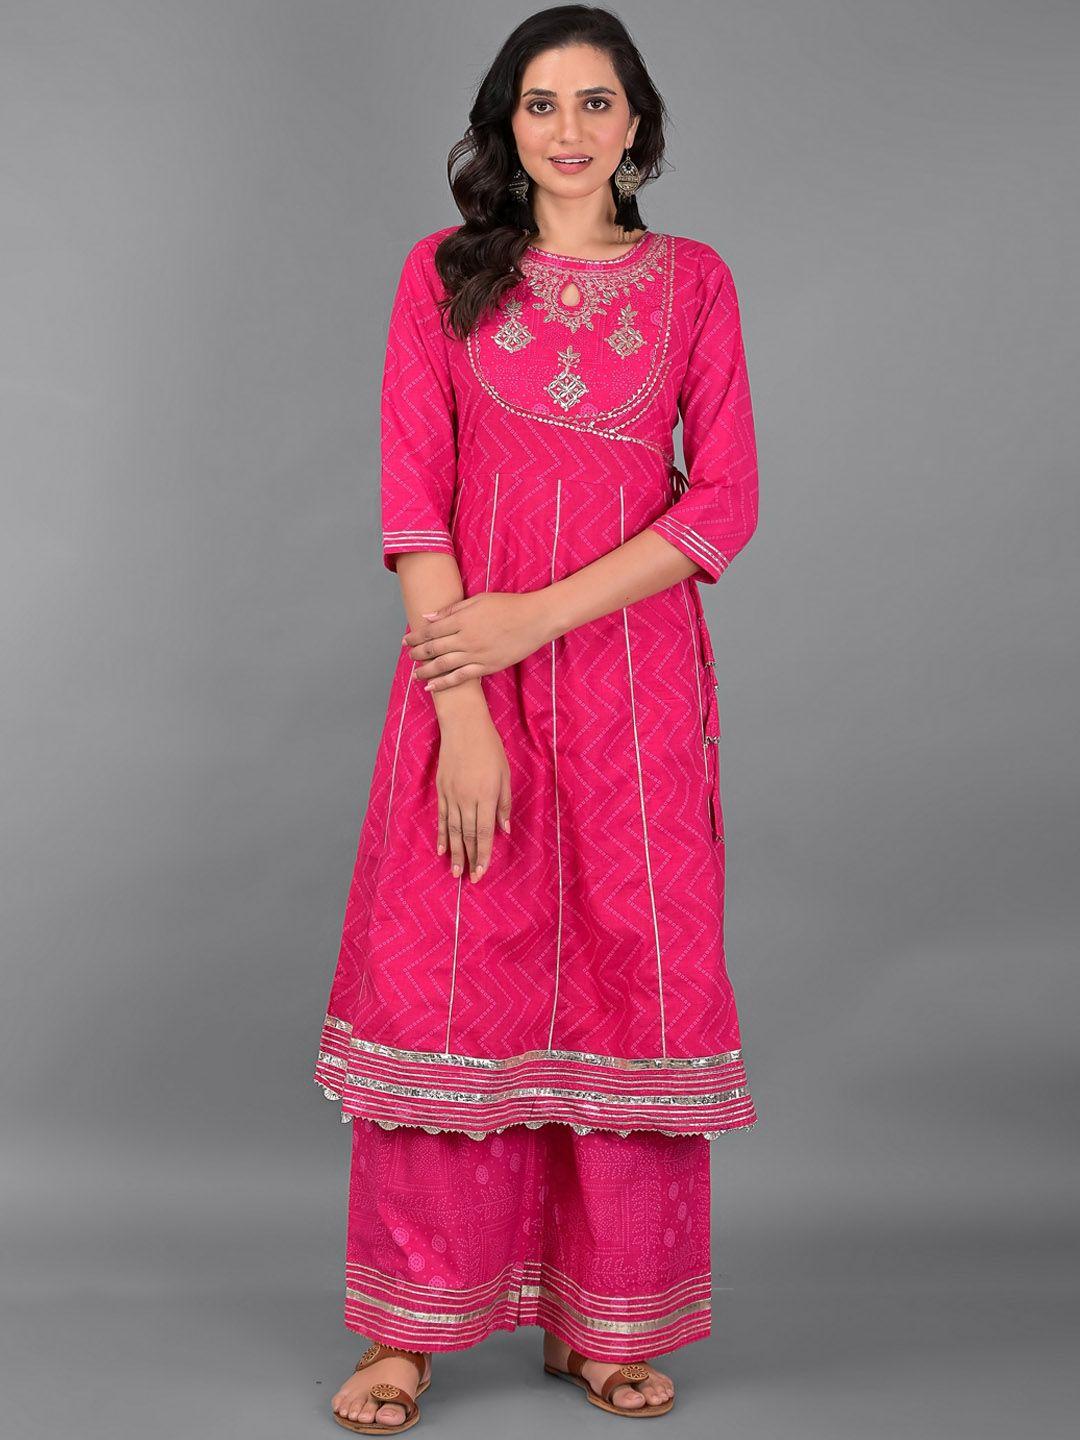 etnicawear women pink floral embroidered pure cotton kurta with palazzos & with dupatta